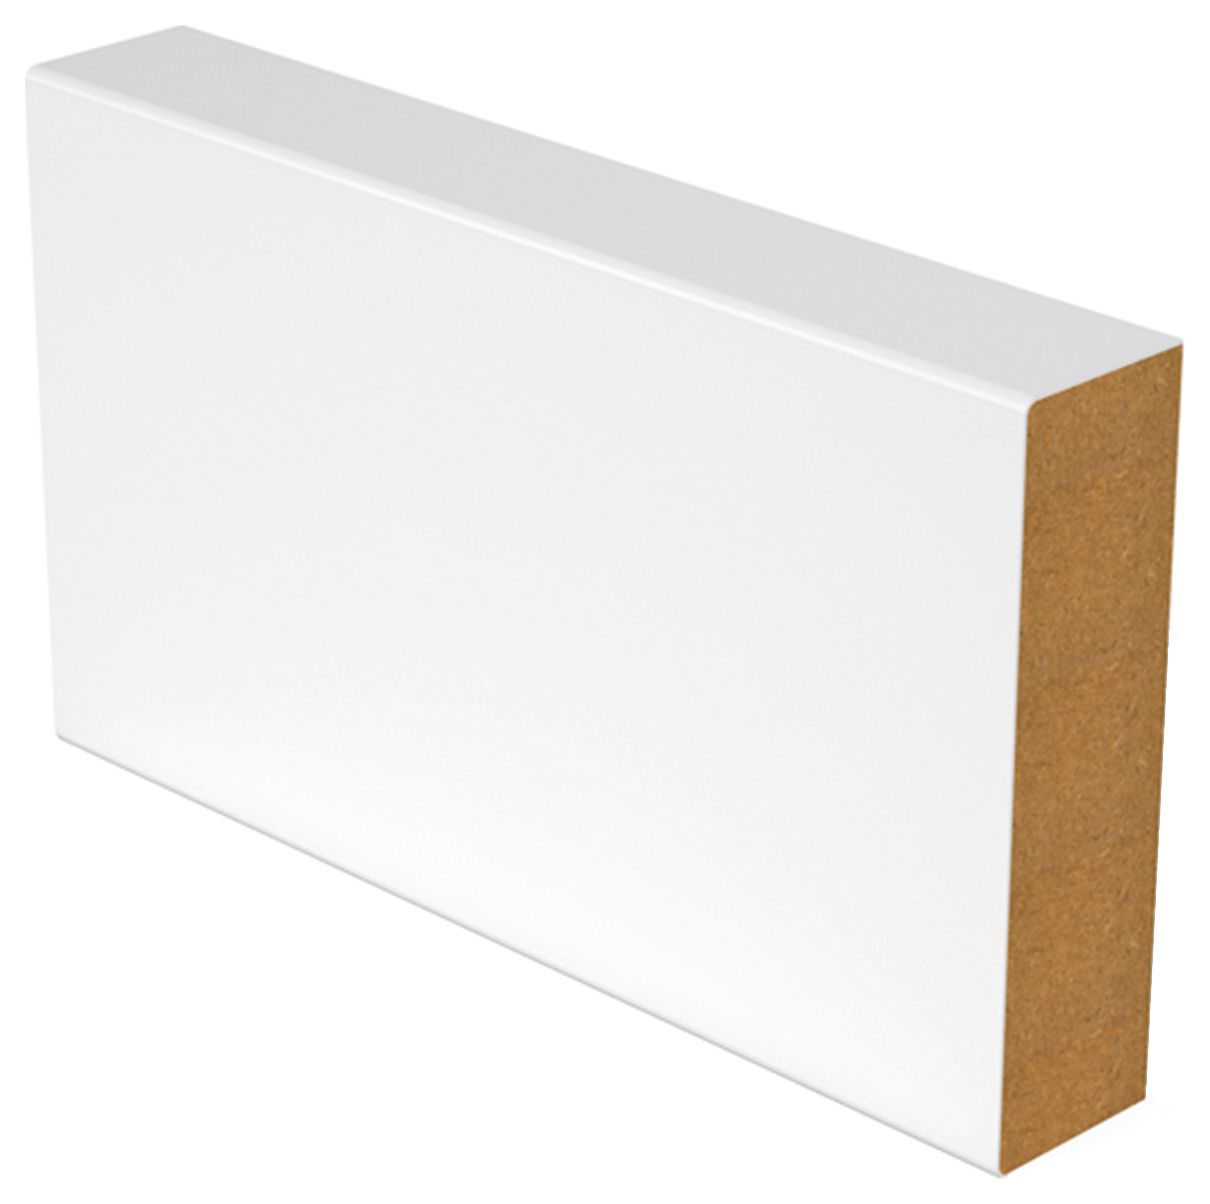 Image of Wickes Square Edge Skirting Or Architrave - 18 x 69 x 2100mm